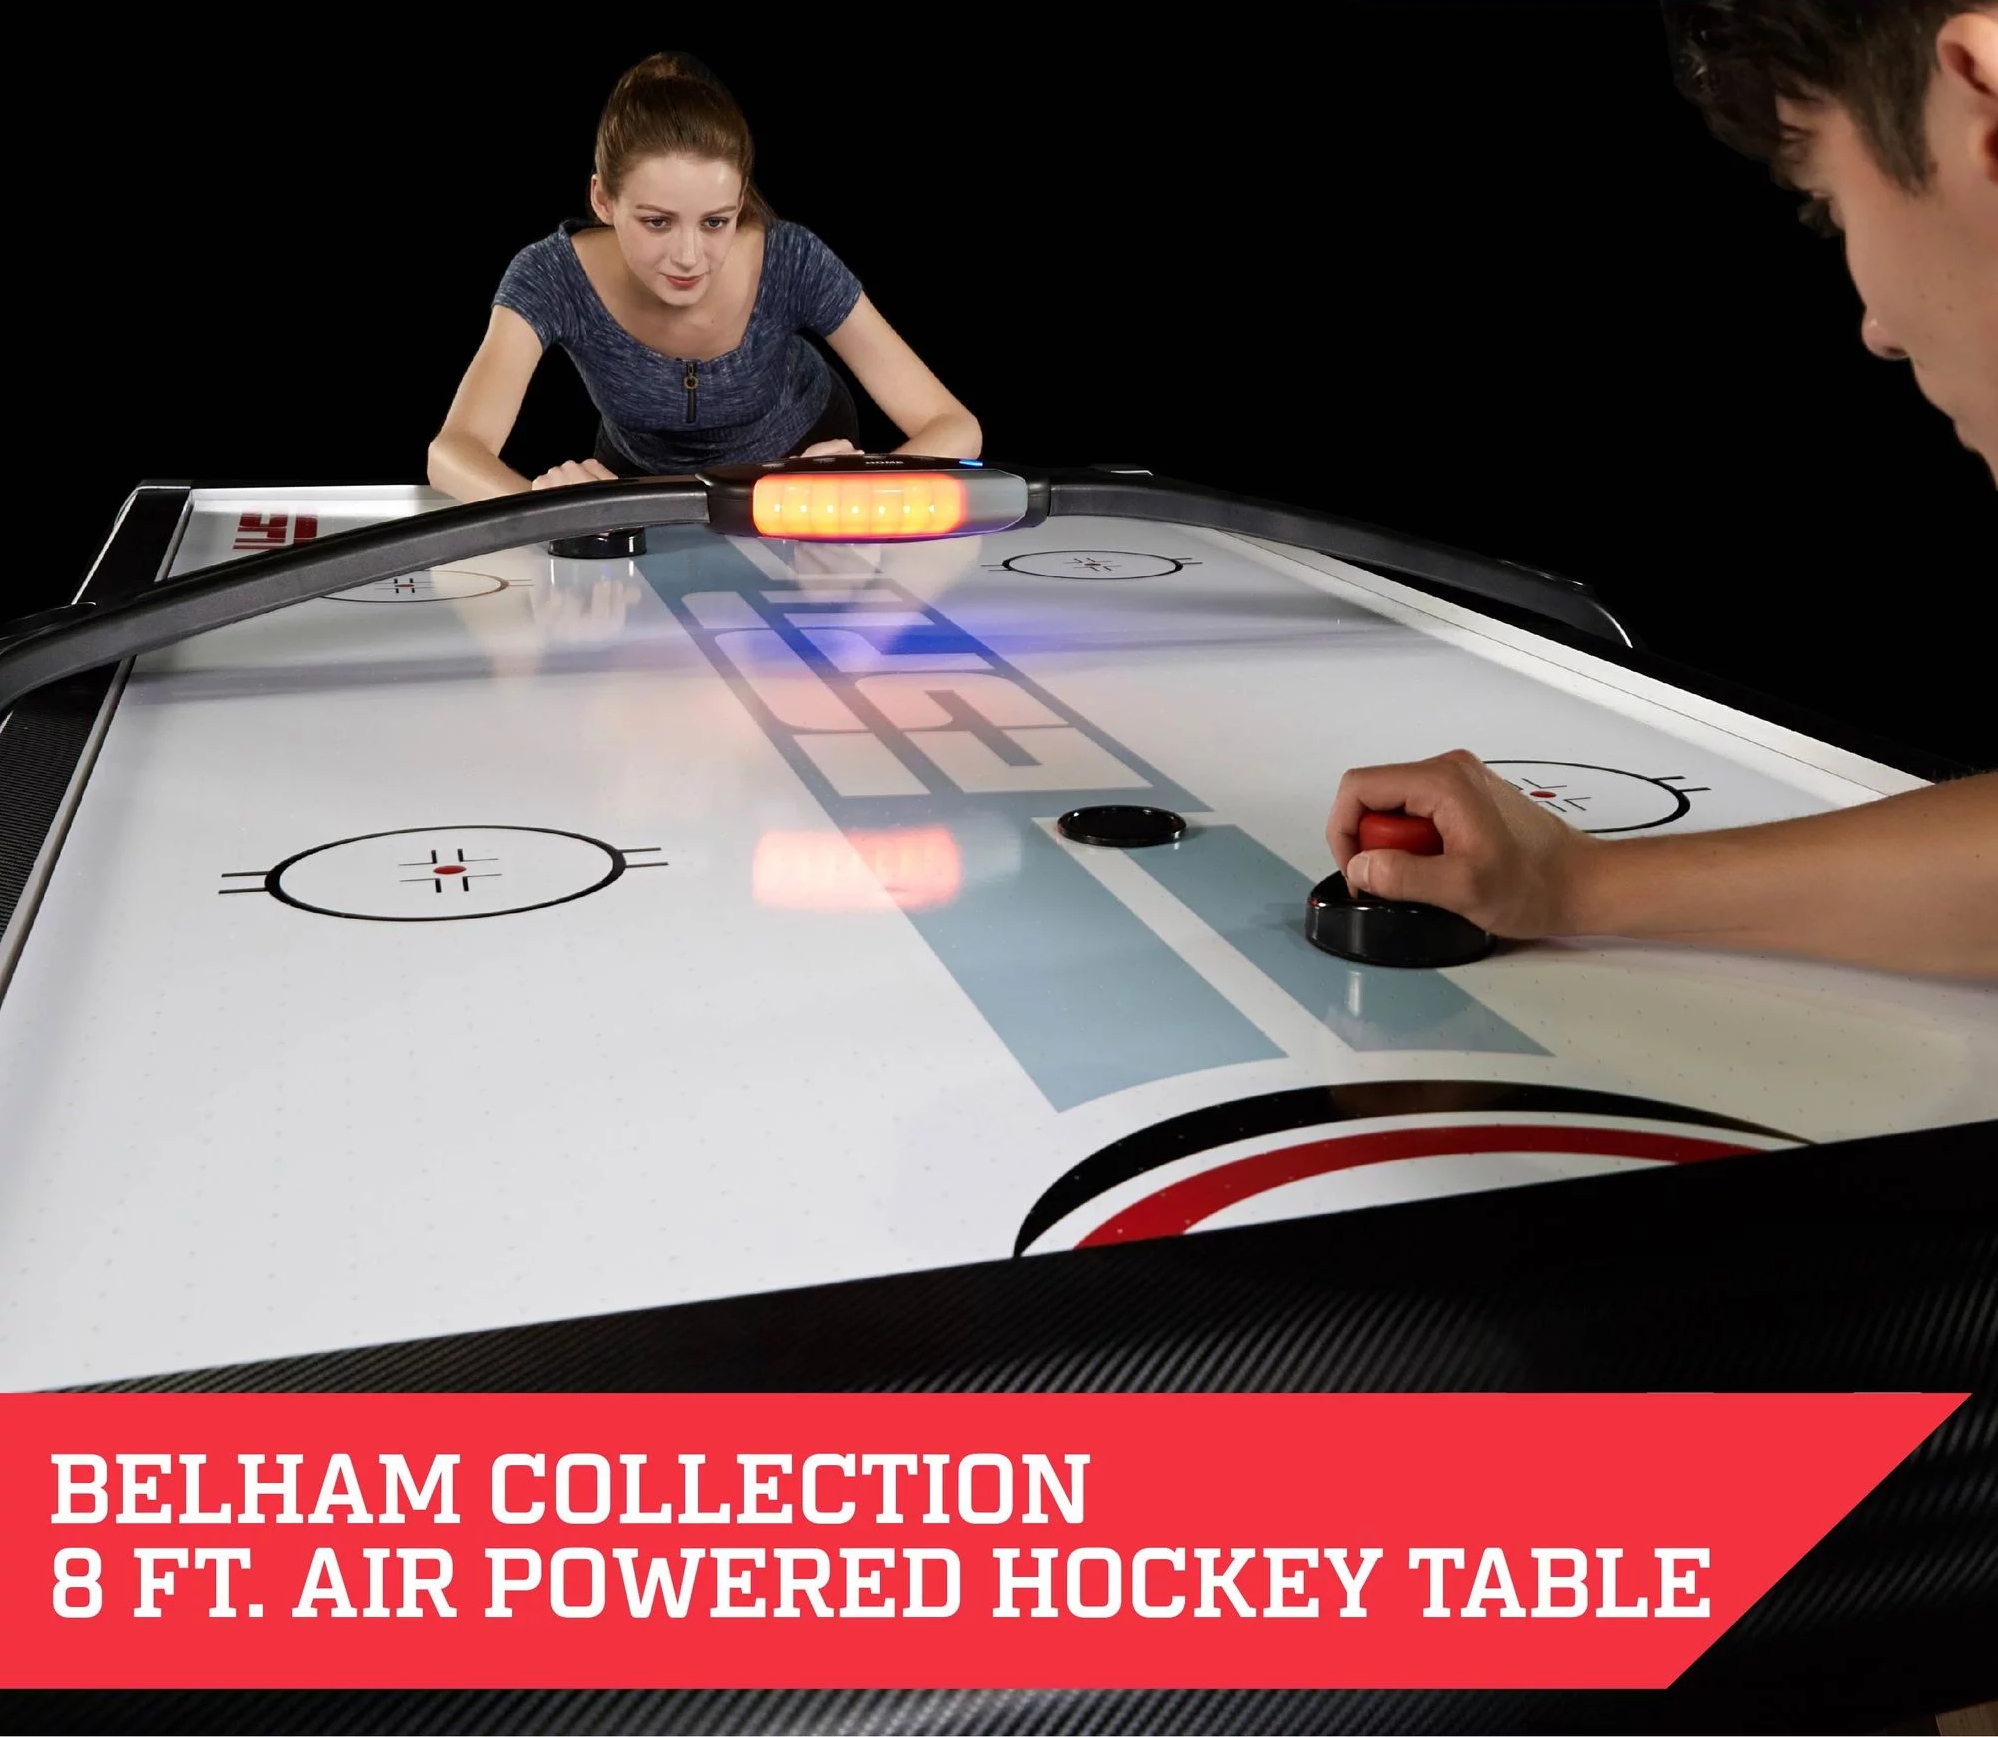 Two persons playing on ESPN Belham Collection 8 Ft. Air Powered Hockey Table